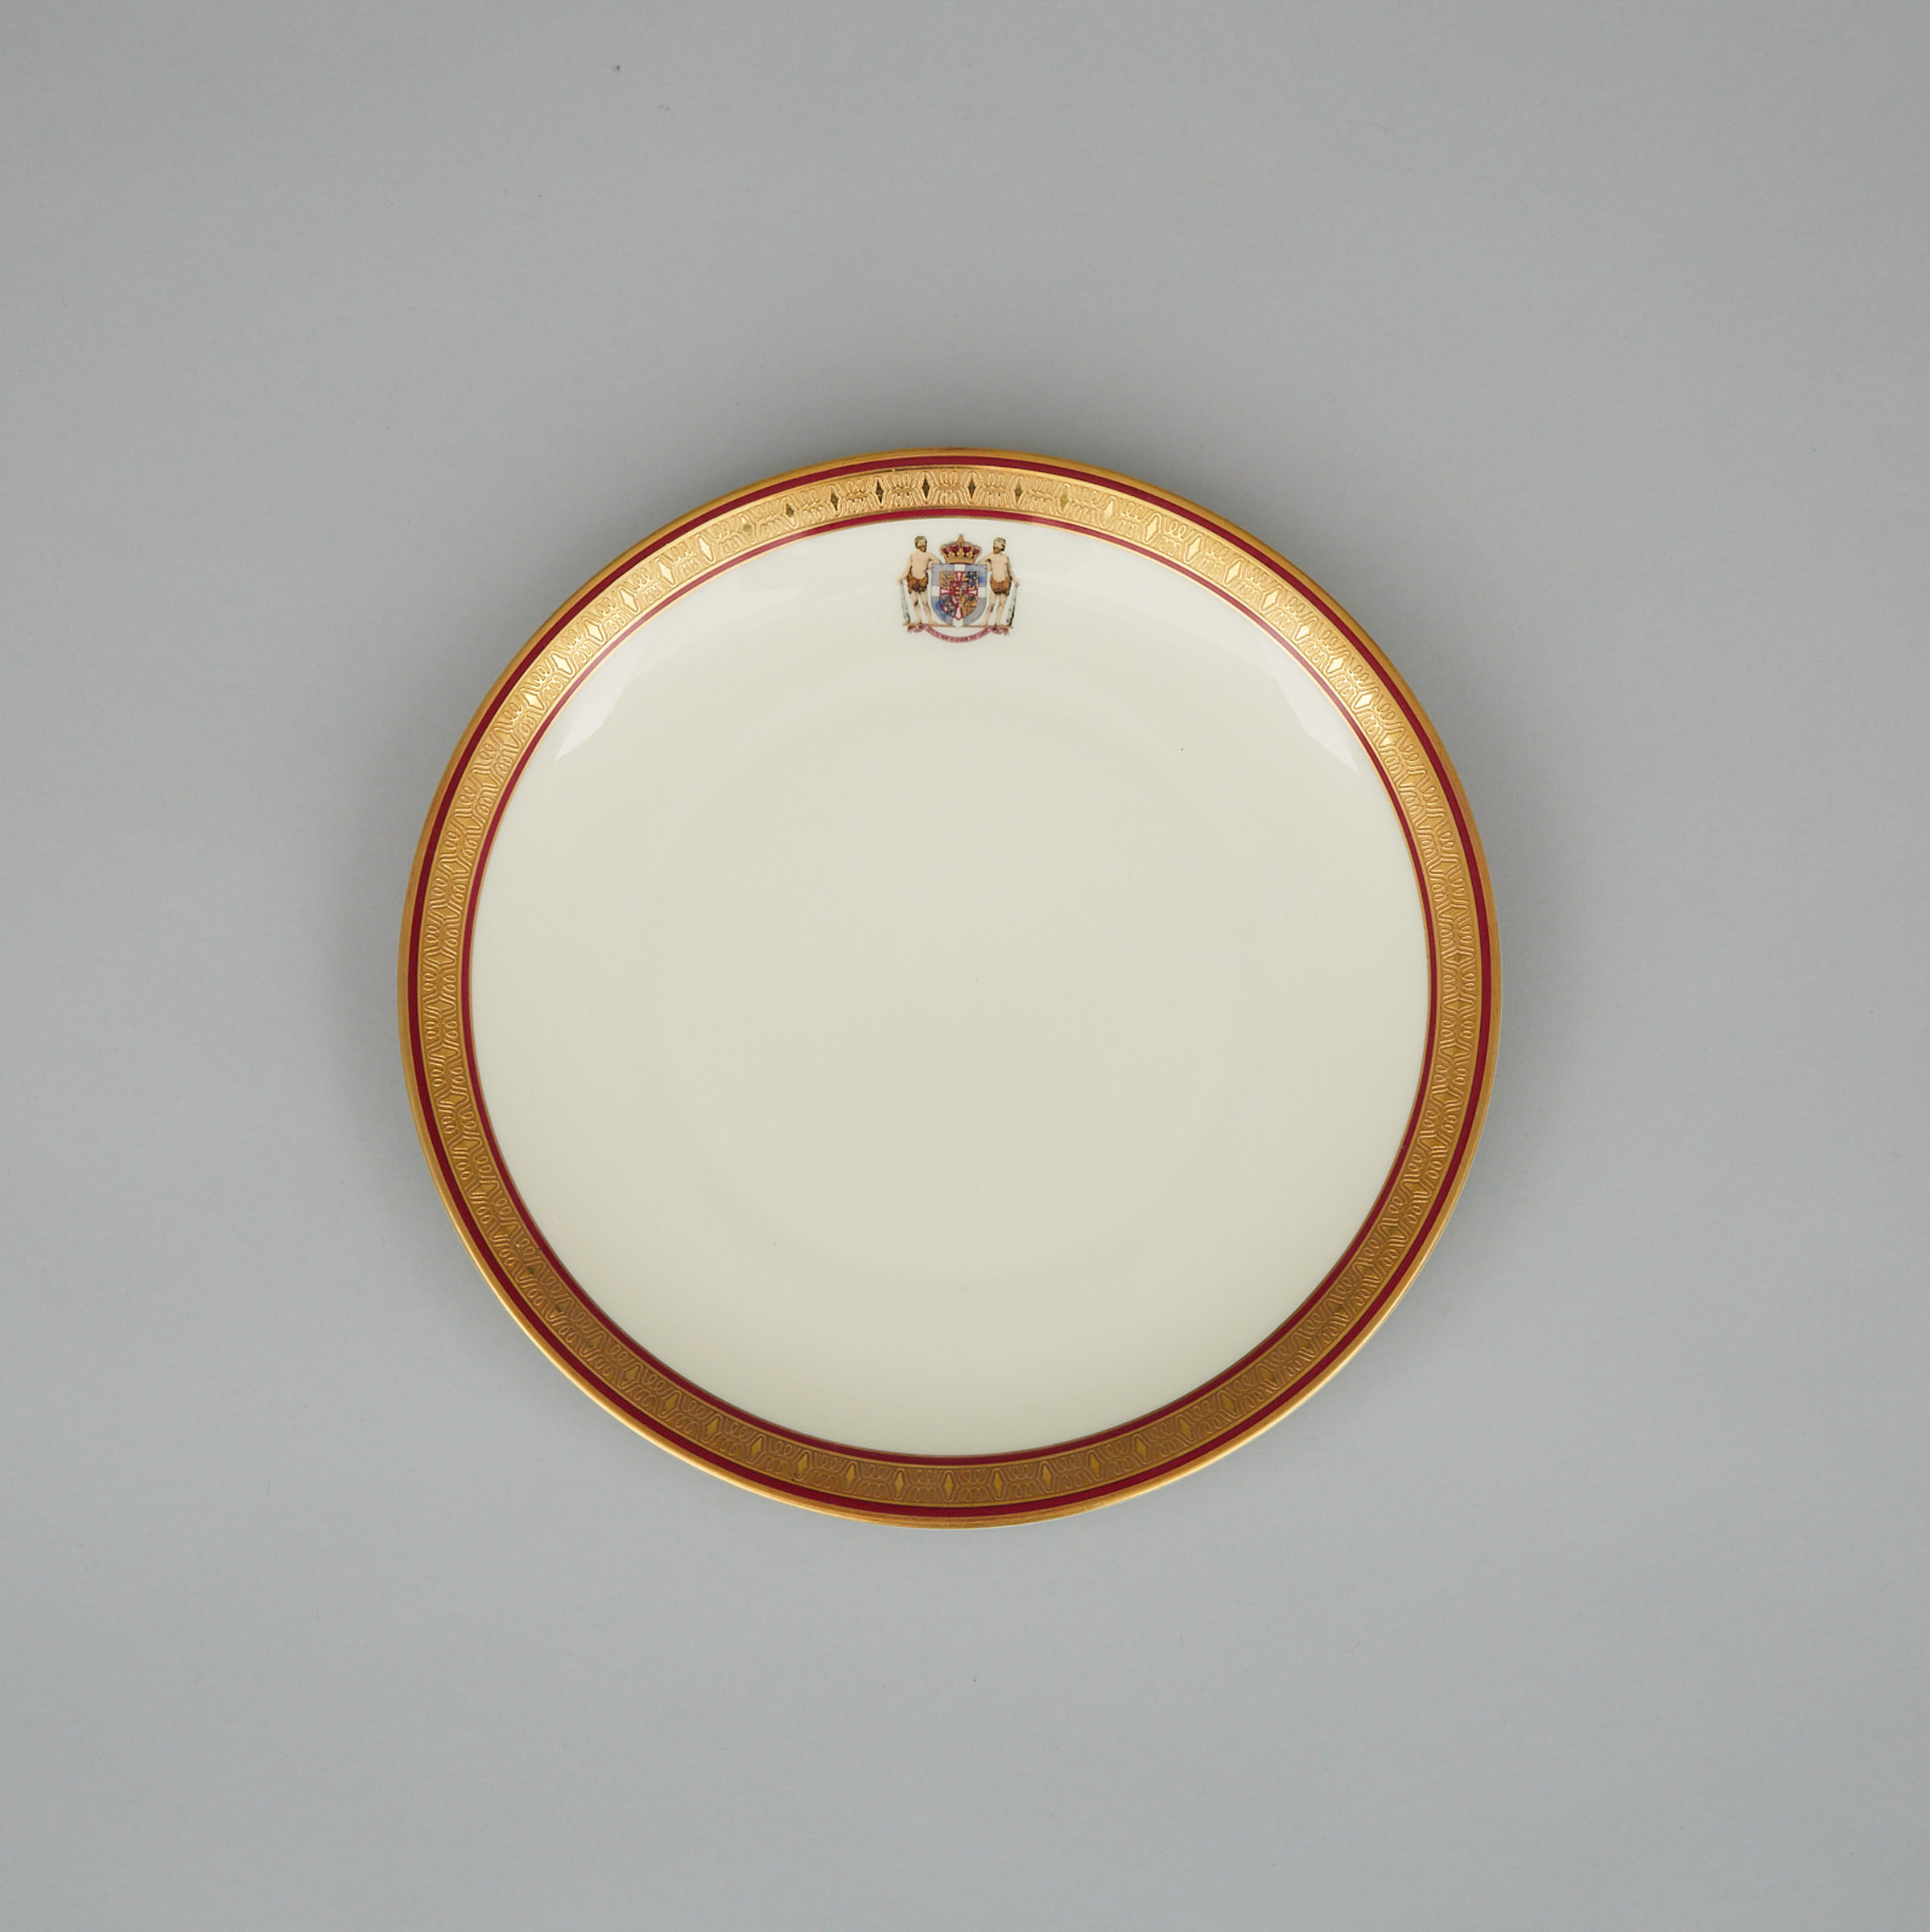 Heinrich Armorial Service Plate for the Greek Royal Family, mid-20th century